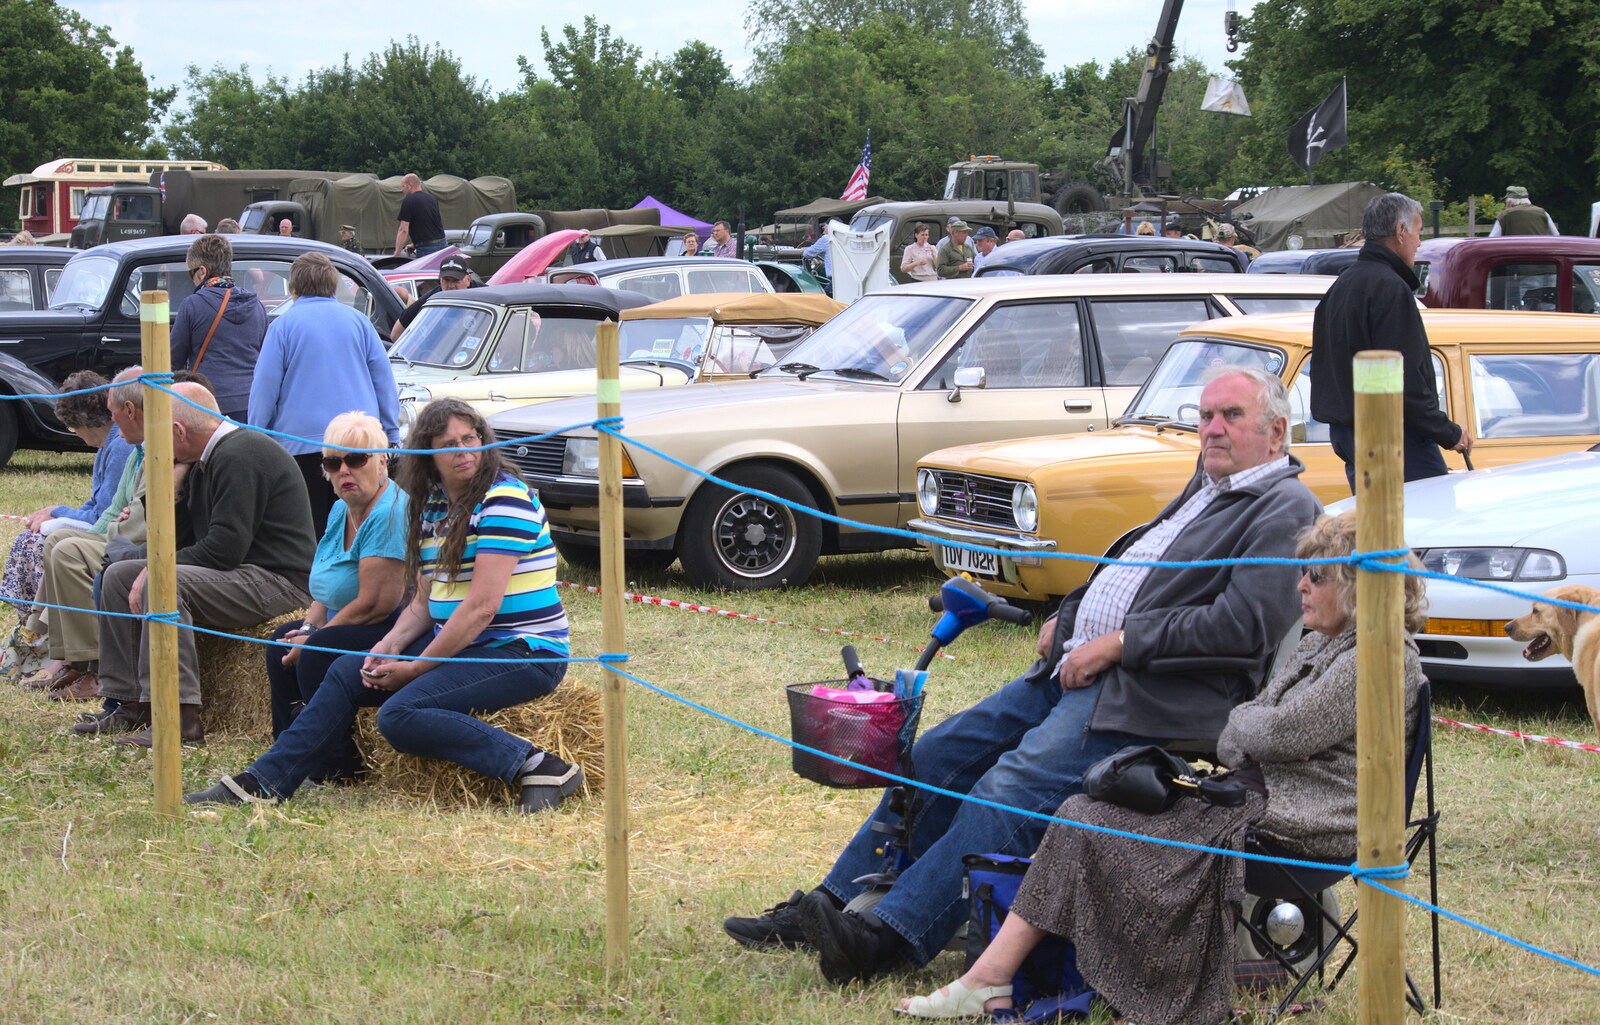 The Olds watch stuff in the show ring from A Vintage Tractorey Sort of Day, Palgrave, Suffolk - 21st June 2015